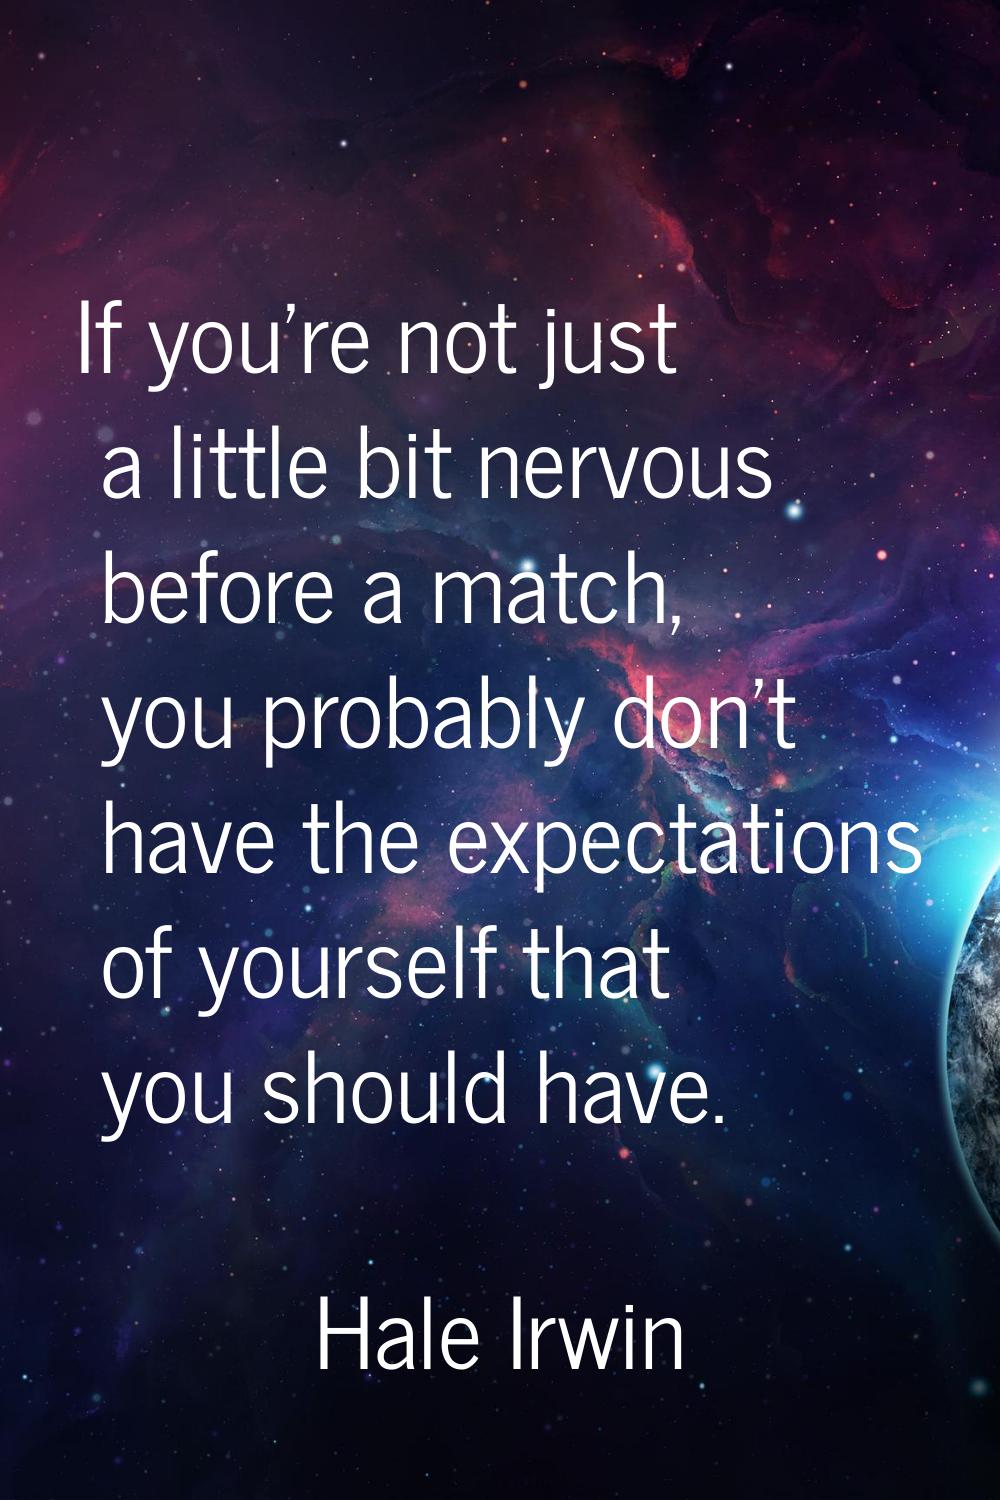 If you're not just a little bit nervous before a match, you probably don't have the expectations of